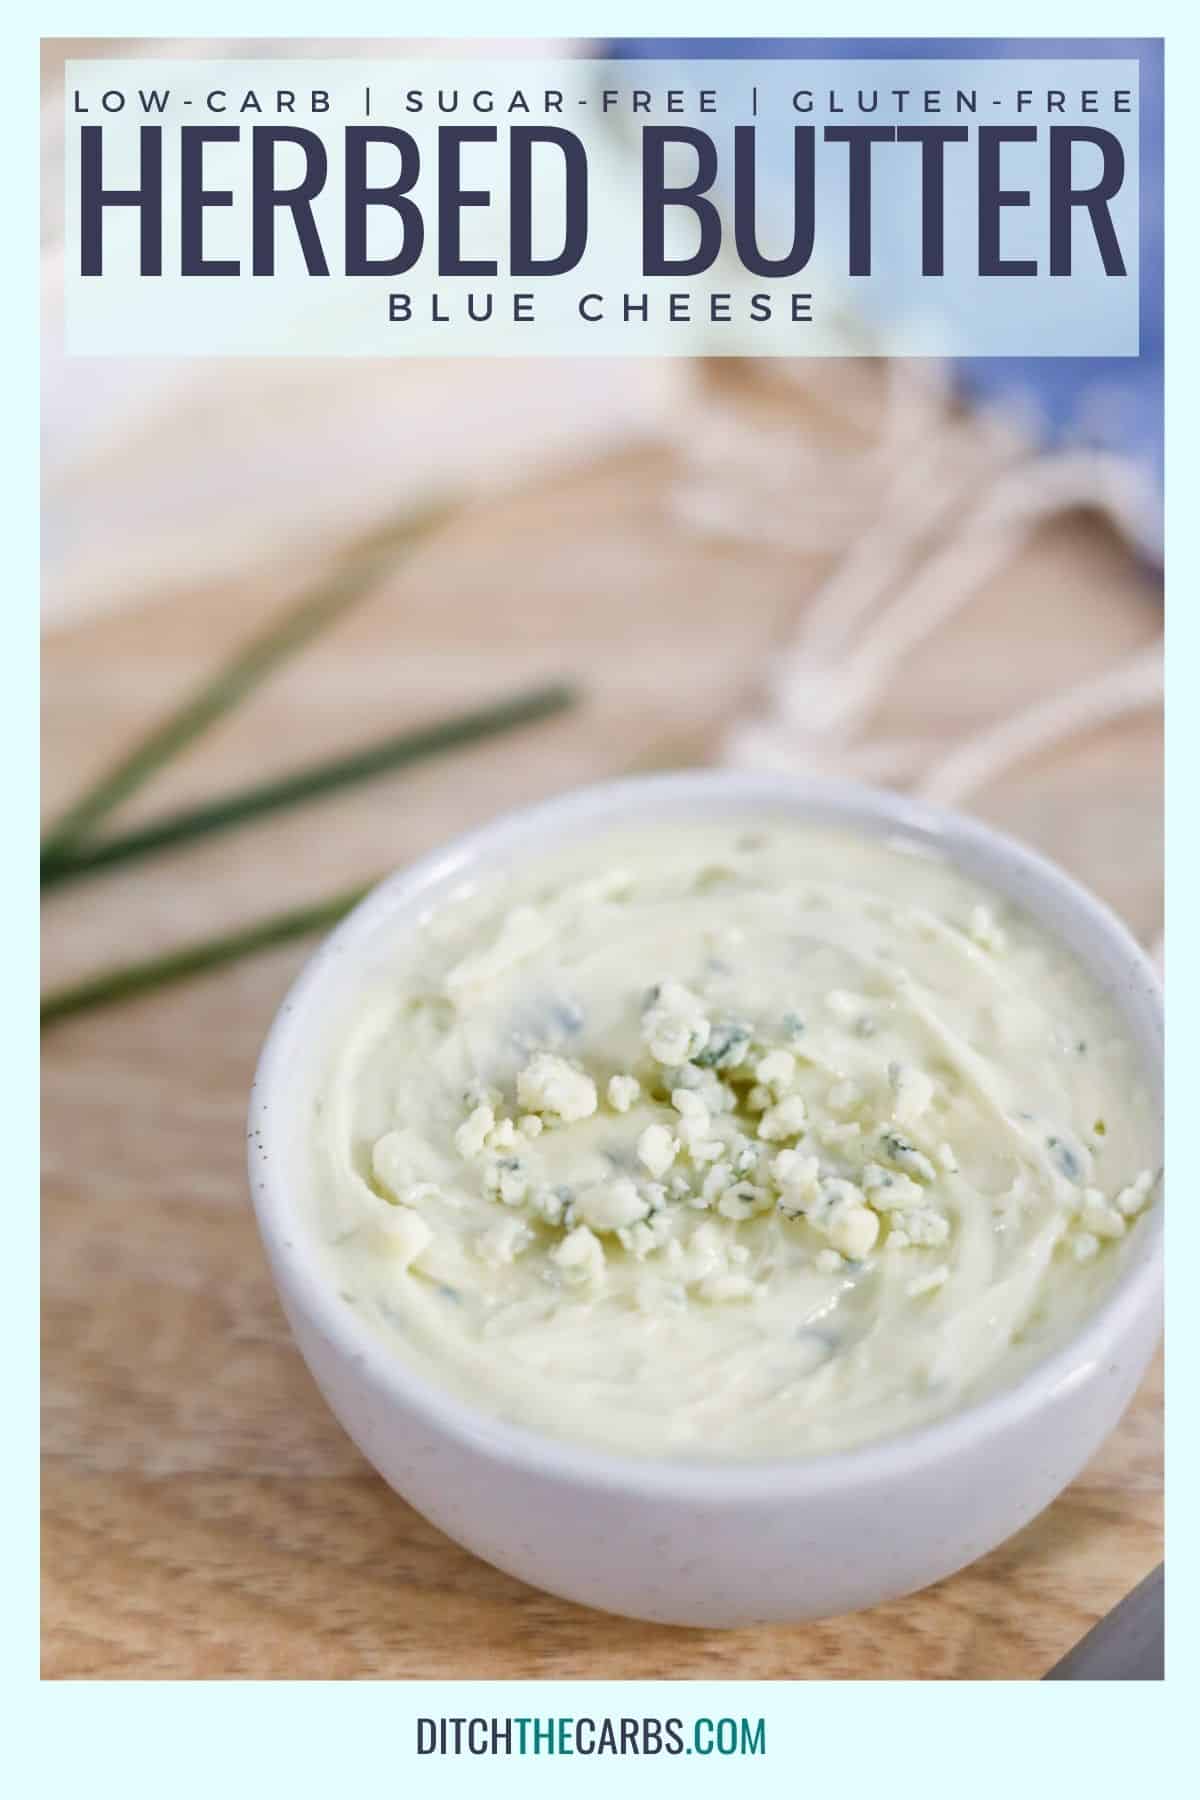 herbed butter recipe in a small white pot